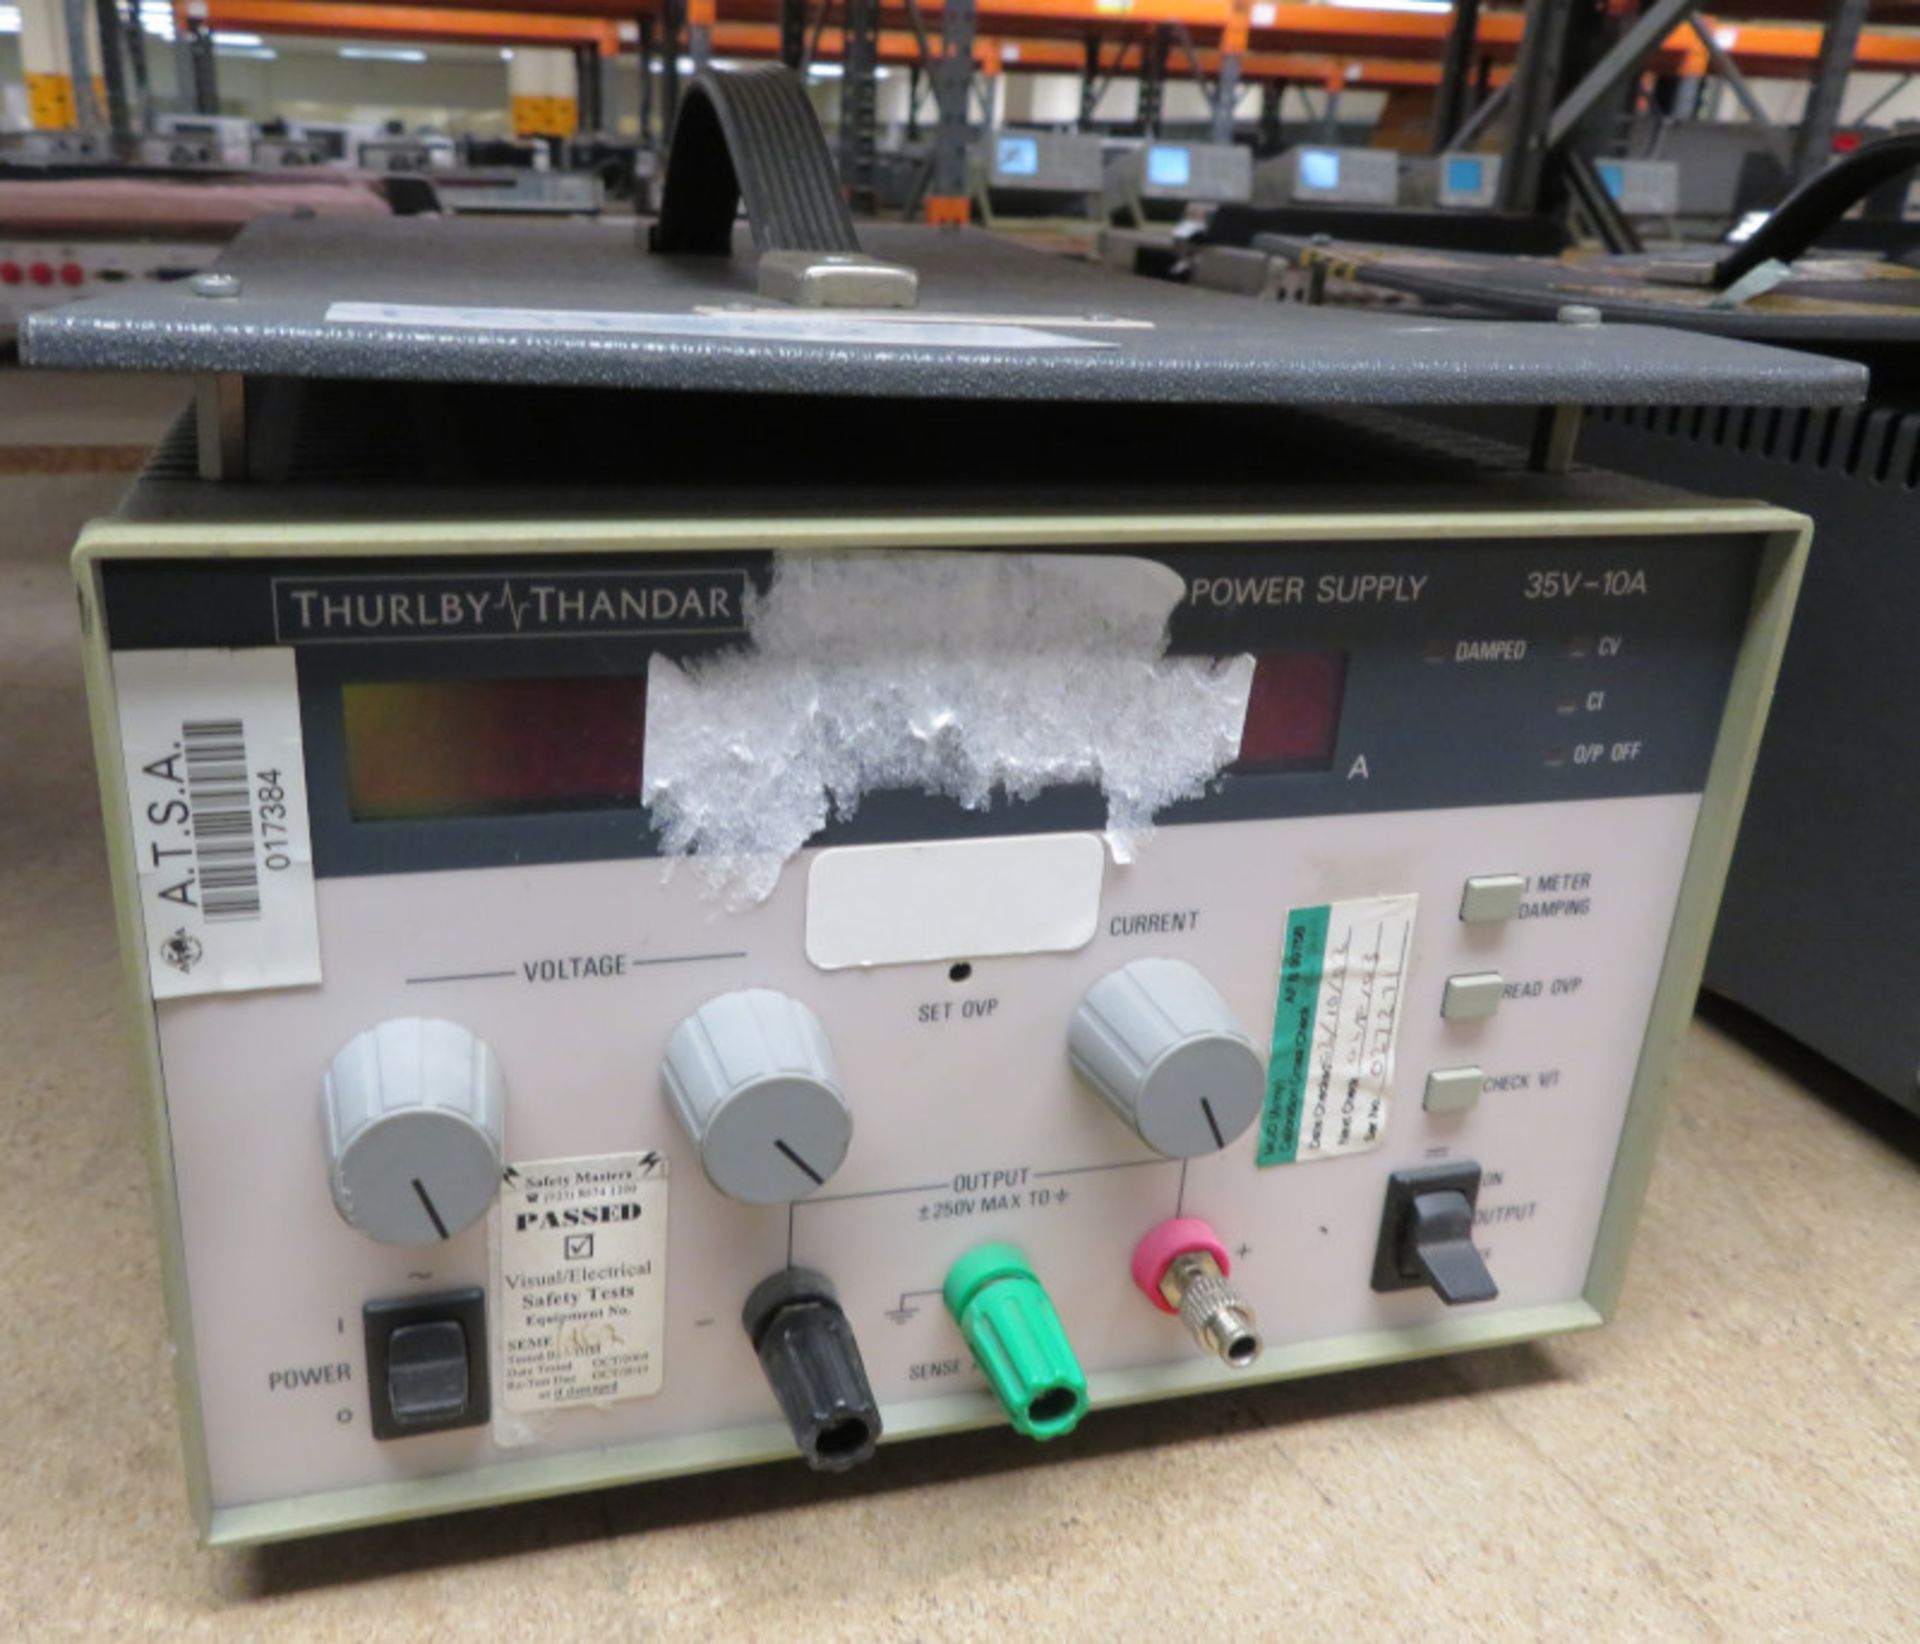 Thurlby Thandar TSX3510 Precision DC Power Supply - 35V - 10A - Damage as seen in pictures